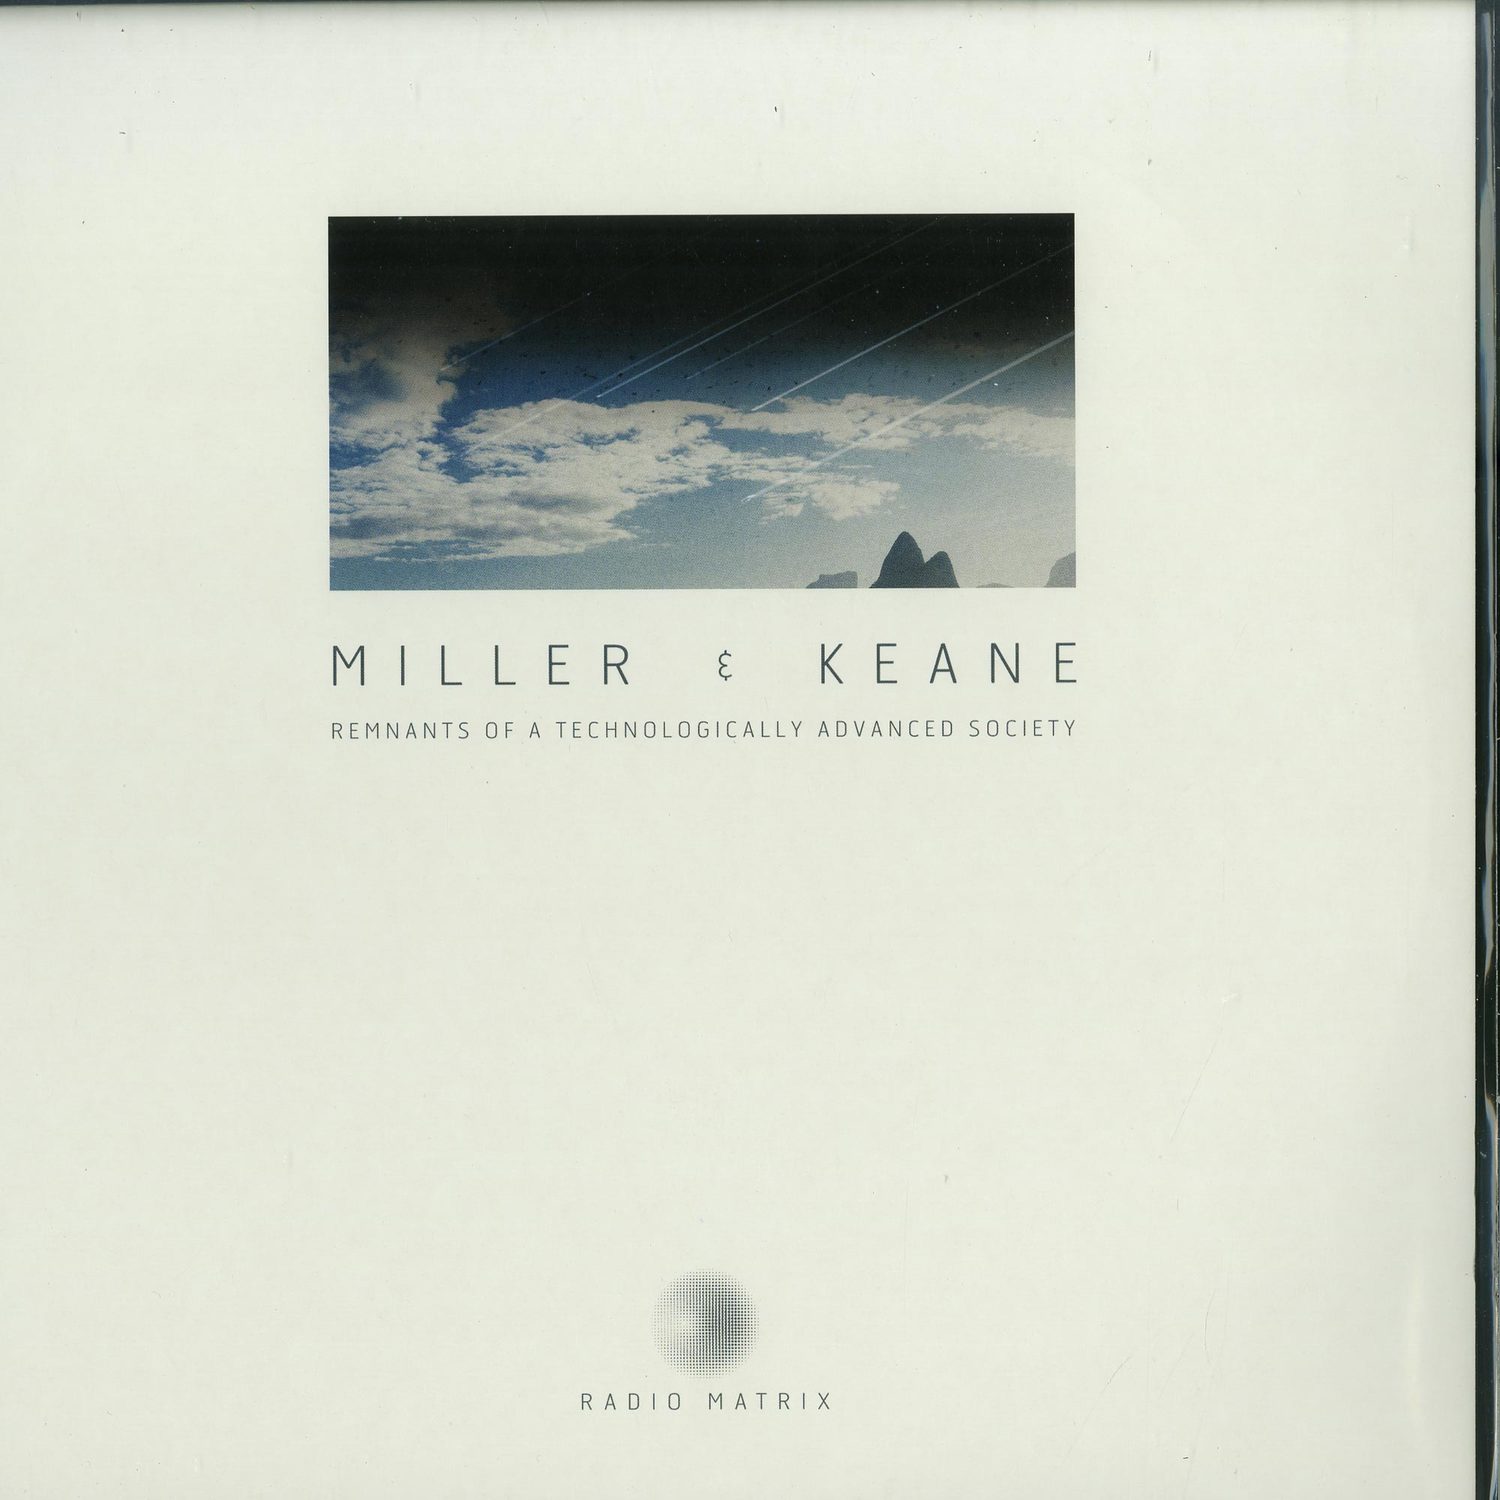 Miller & Keane - REMNANTS OF A TECHNOLOGICALLY ADVANCED SOCIETY